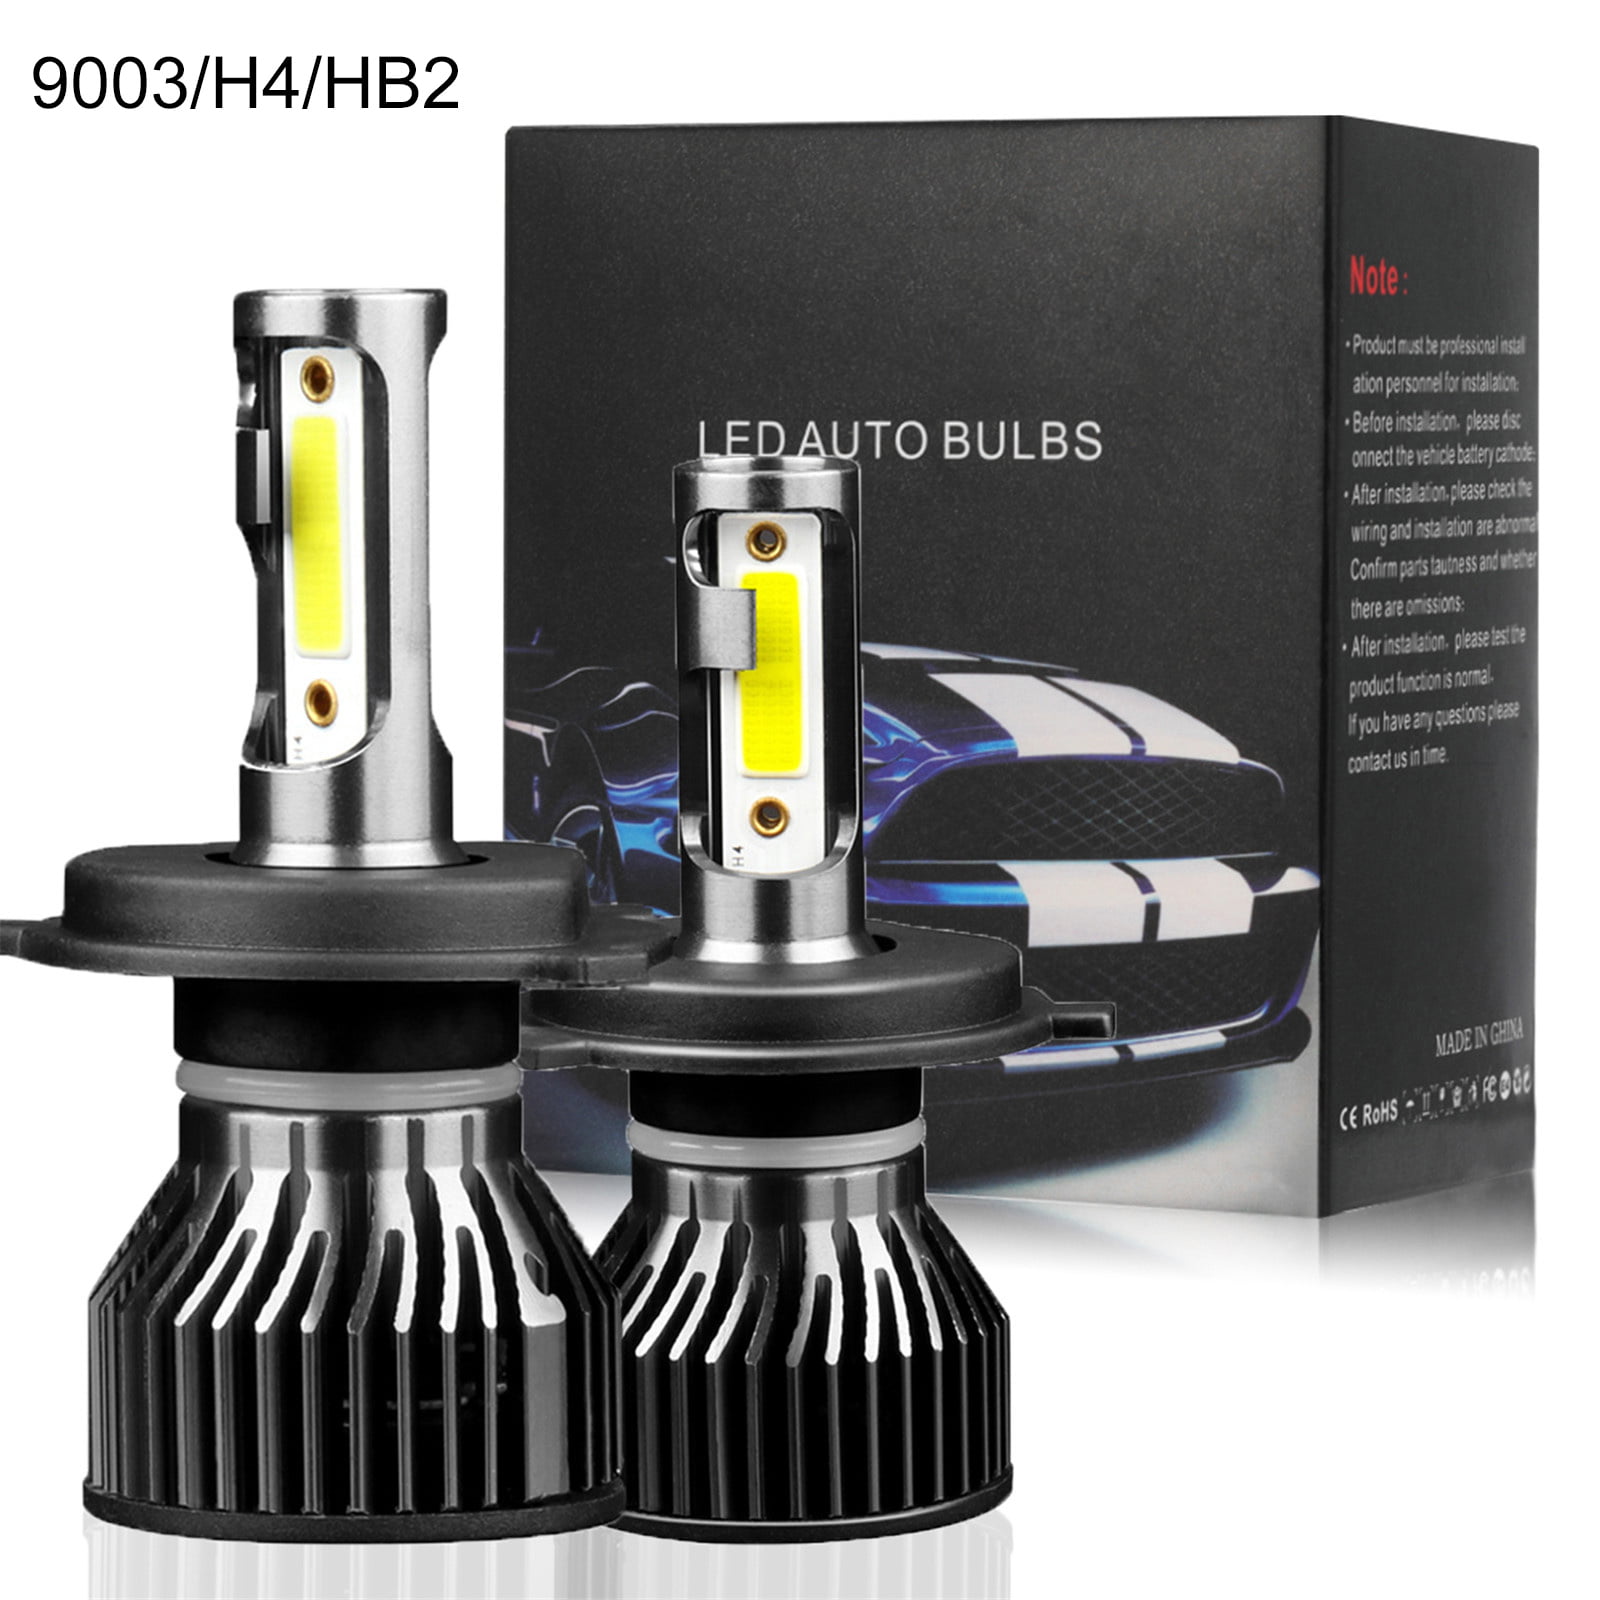 Famyfamy Super Led Headlight for 9005 HB3 H10 Lights Y7LED Far And Near Beam Integrated Lamps 2PCS 6000K Auto Parts 9005/HB3/H10 12V Car Bulb,Lamps Led Bulbs Motorcycle Lights - Walmart.com